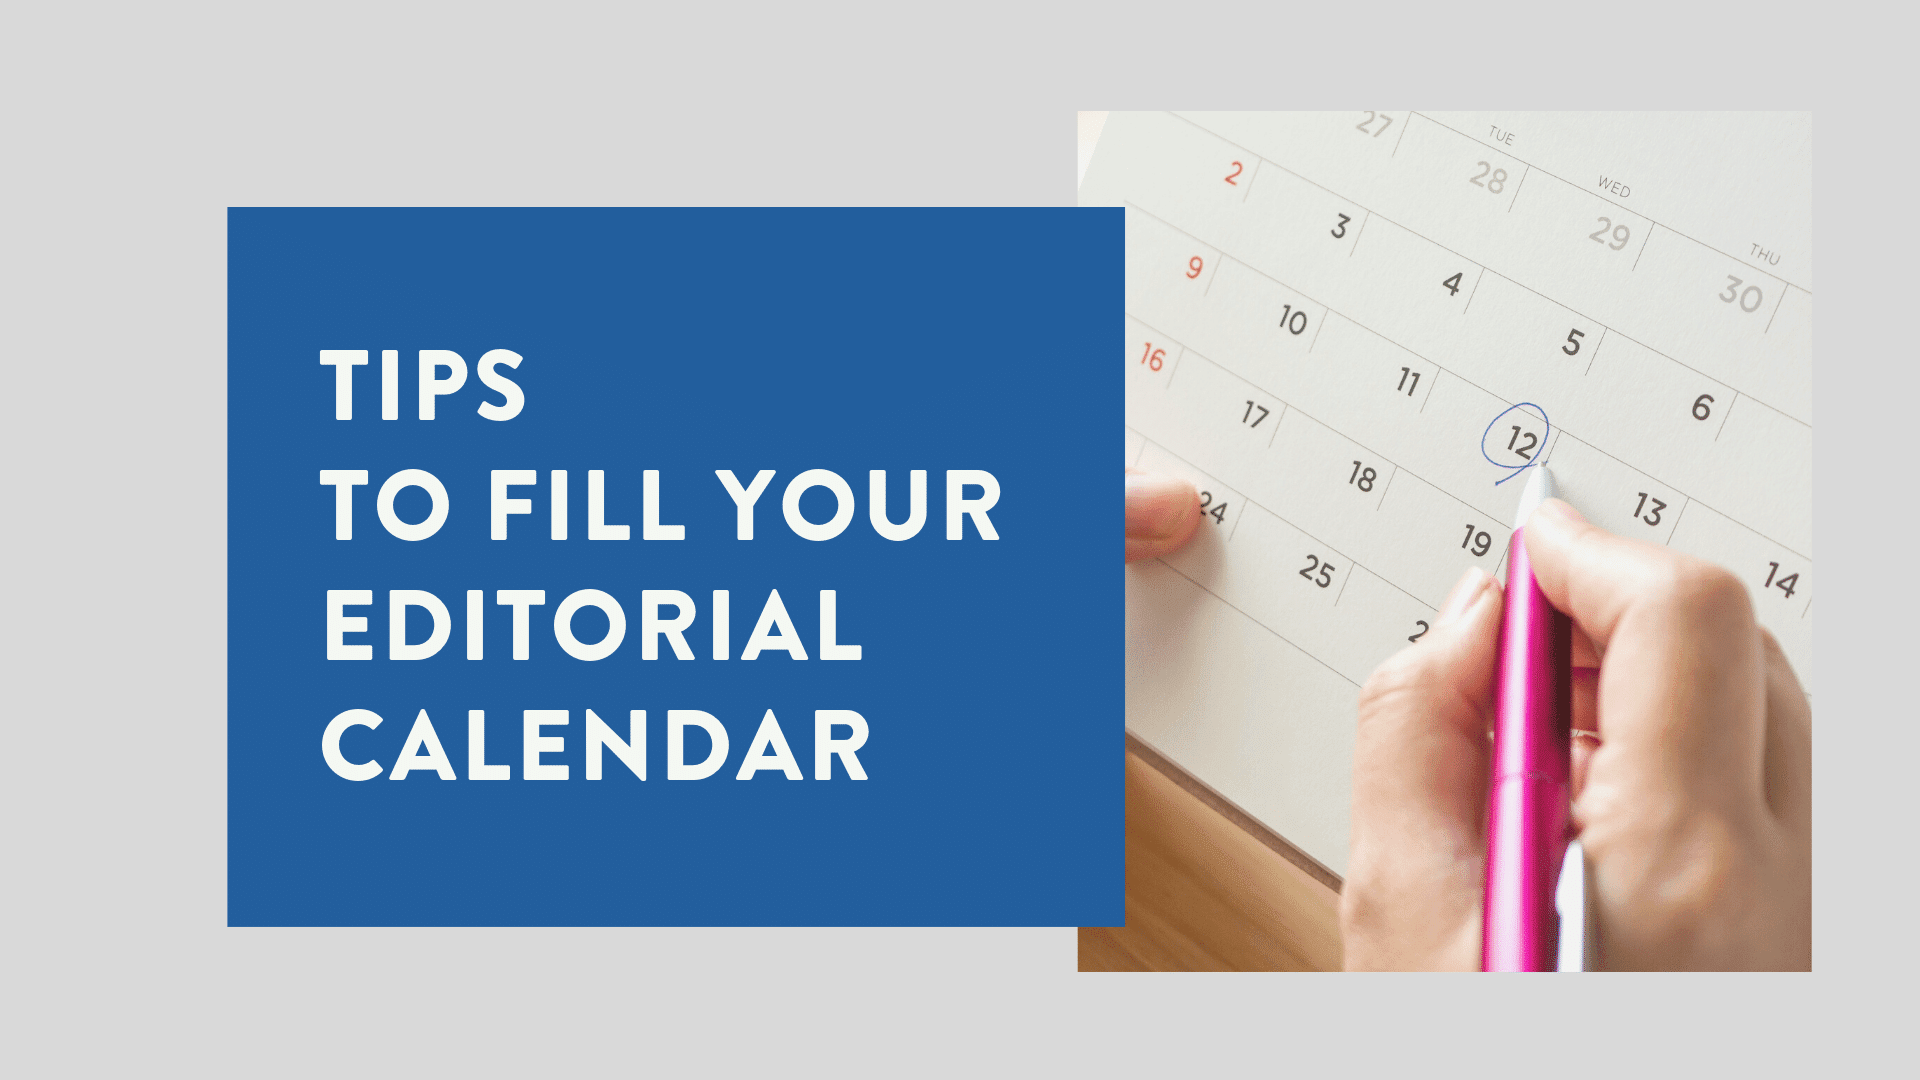 content-curation-tips-to-fill-your-editorial-calendar-social-media